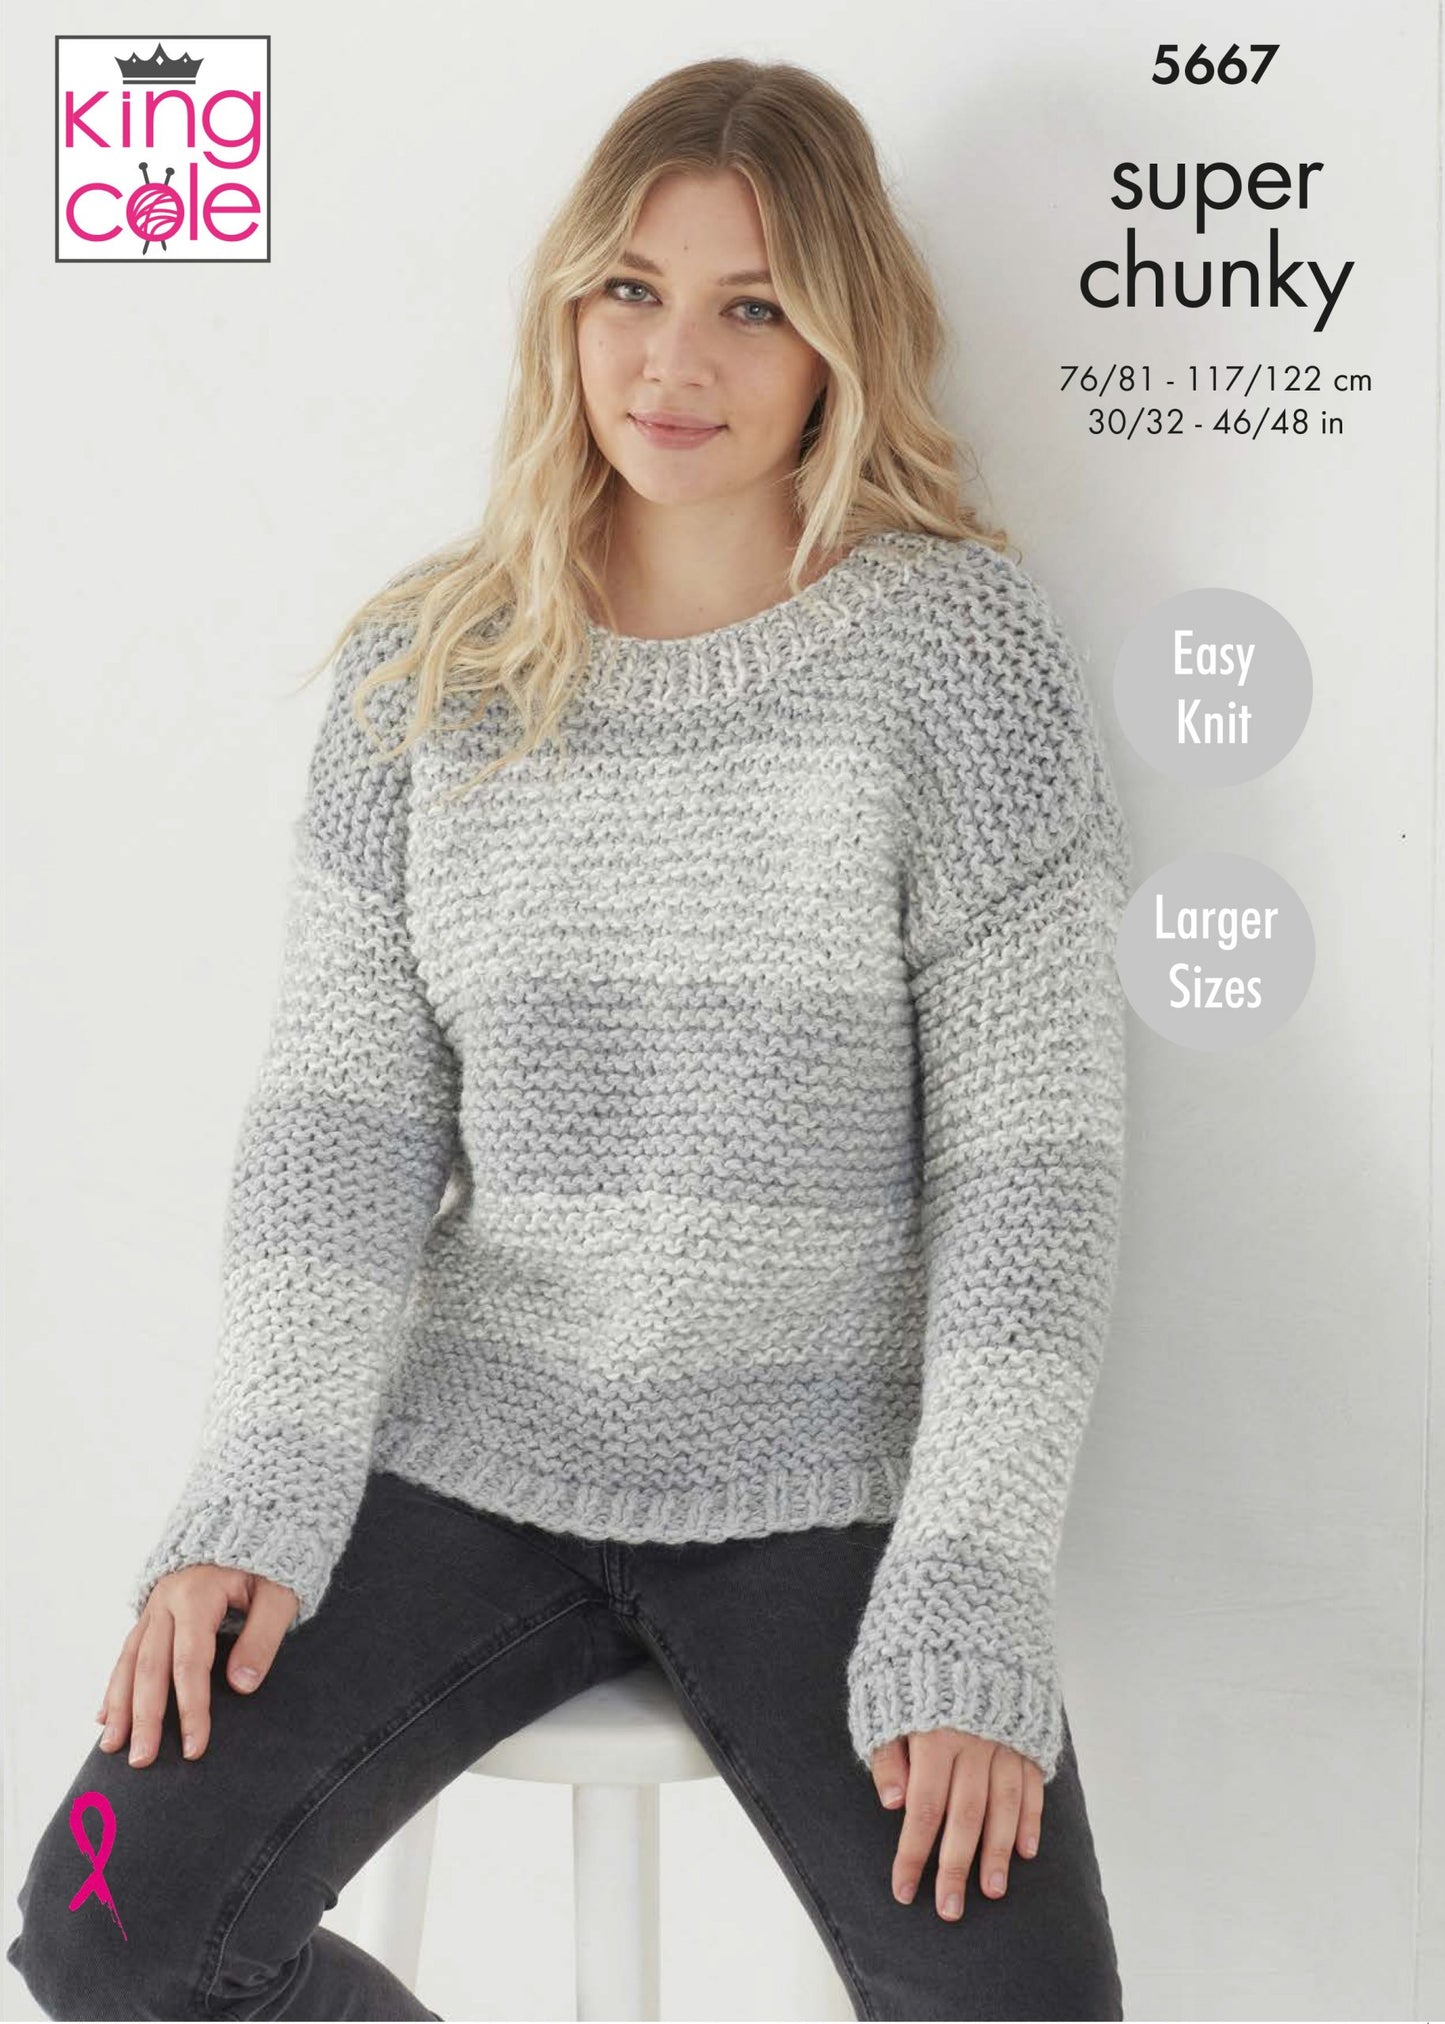 Knitting Pattern 5667 - Sweater & Cardigan Knitted in Timeless Classic Super Chunky